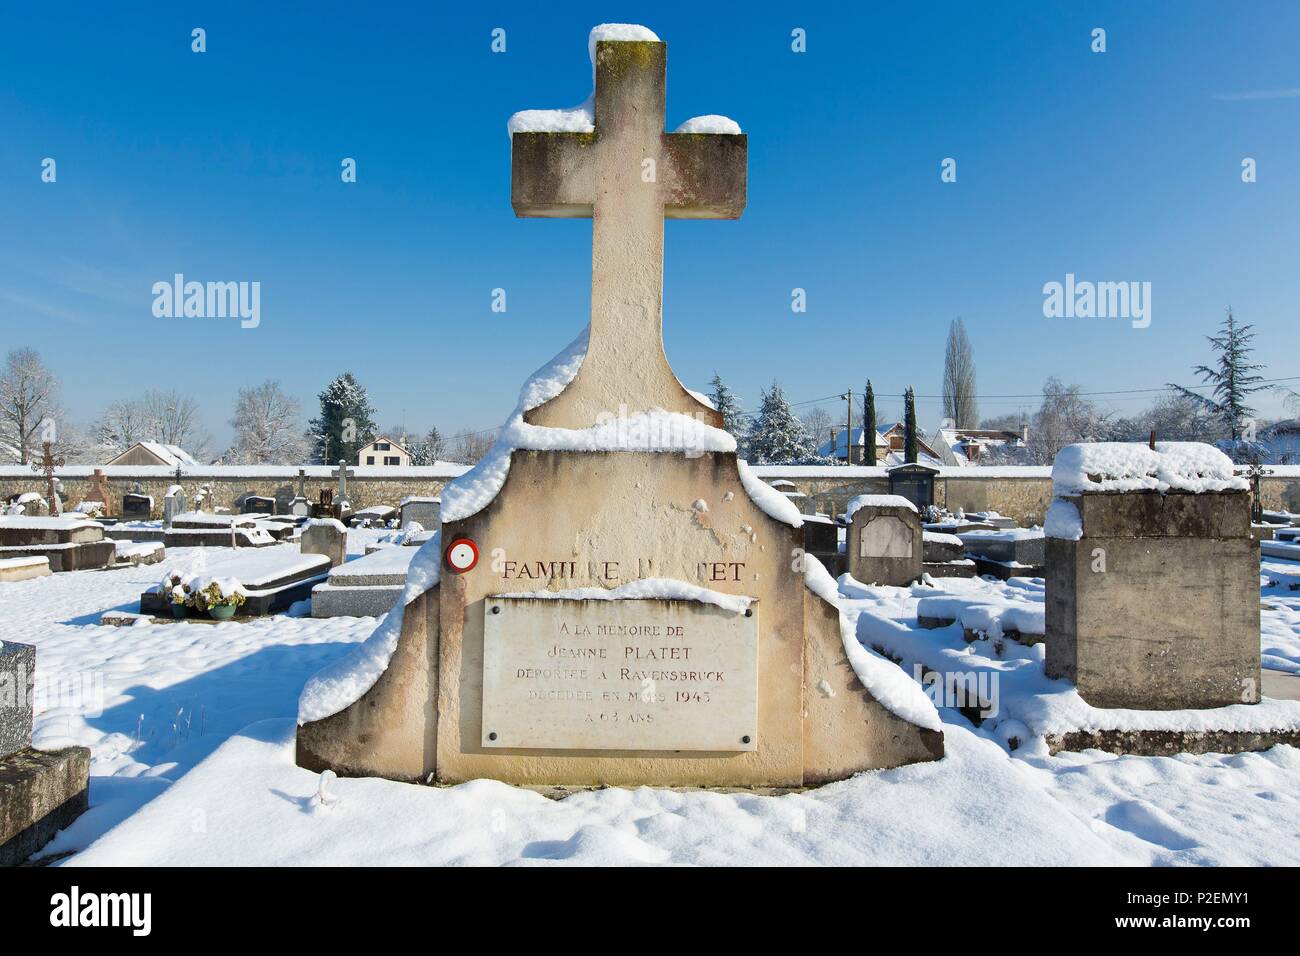 France, Seine et Marne, Bois le Roi, the cemetery, grave of Jeanne Platet, resistence fighter prisoner in Auchwitz concentration camp where she died Stock Photo